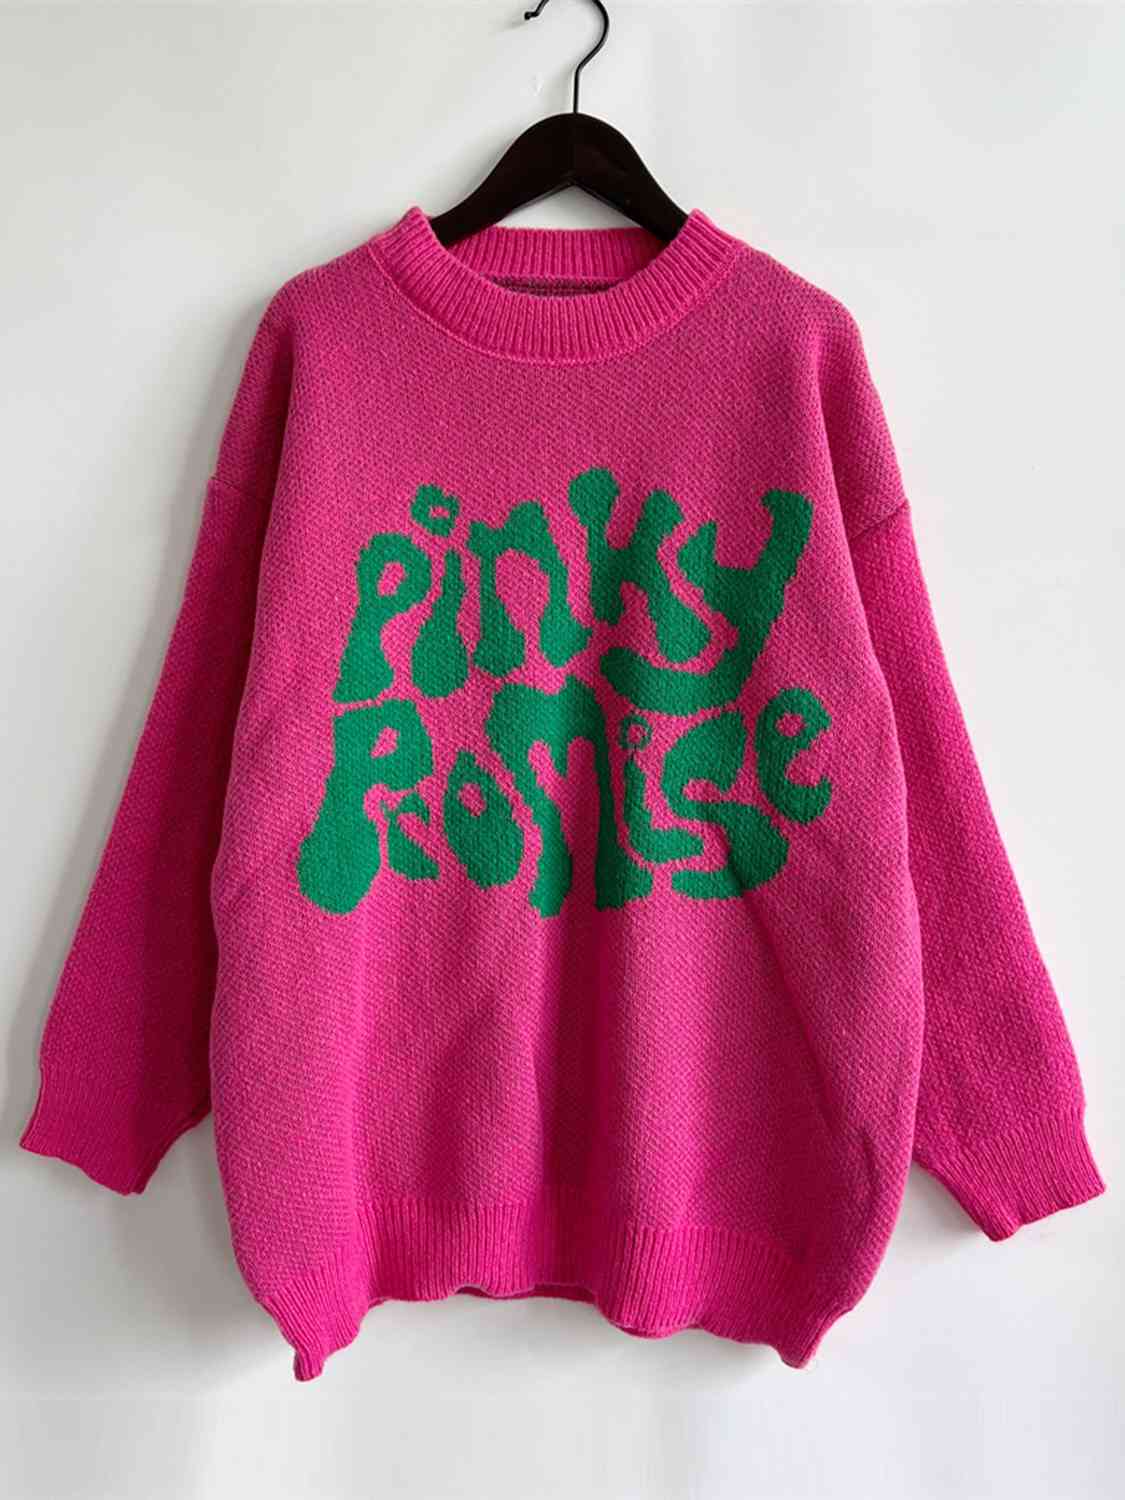 PINKY PROMISE Graphic Sweater - Sweaters - Shirts & Tops - 2 - 2024